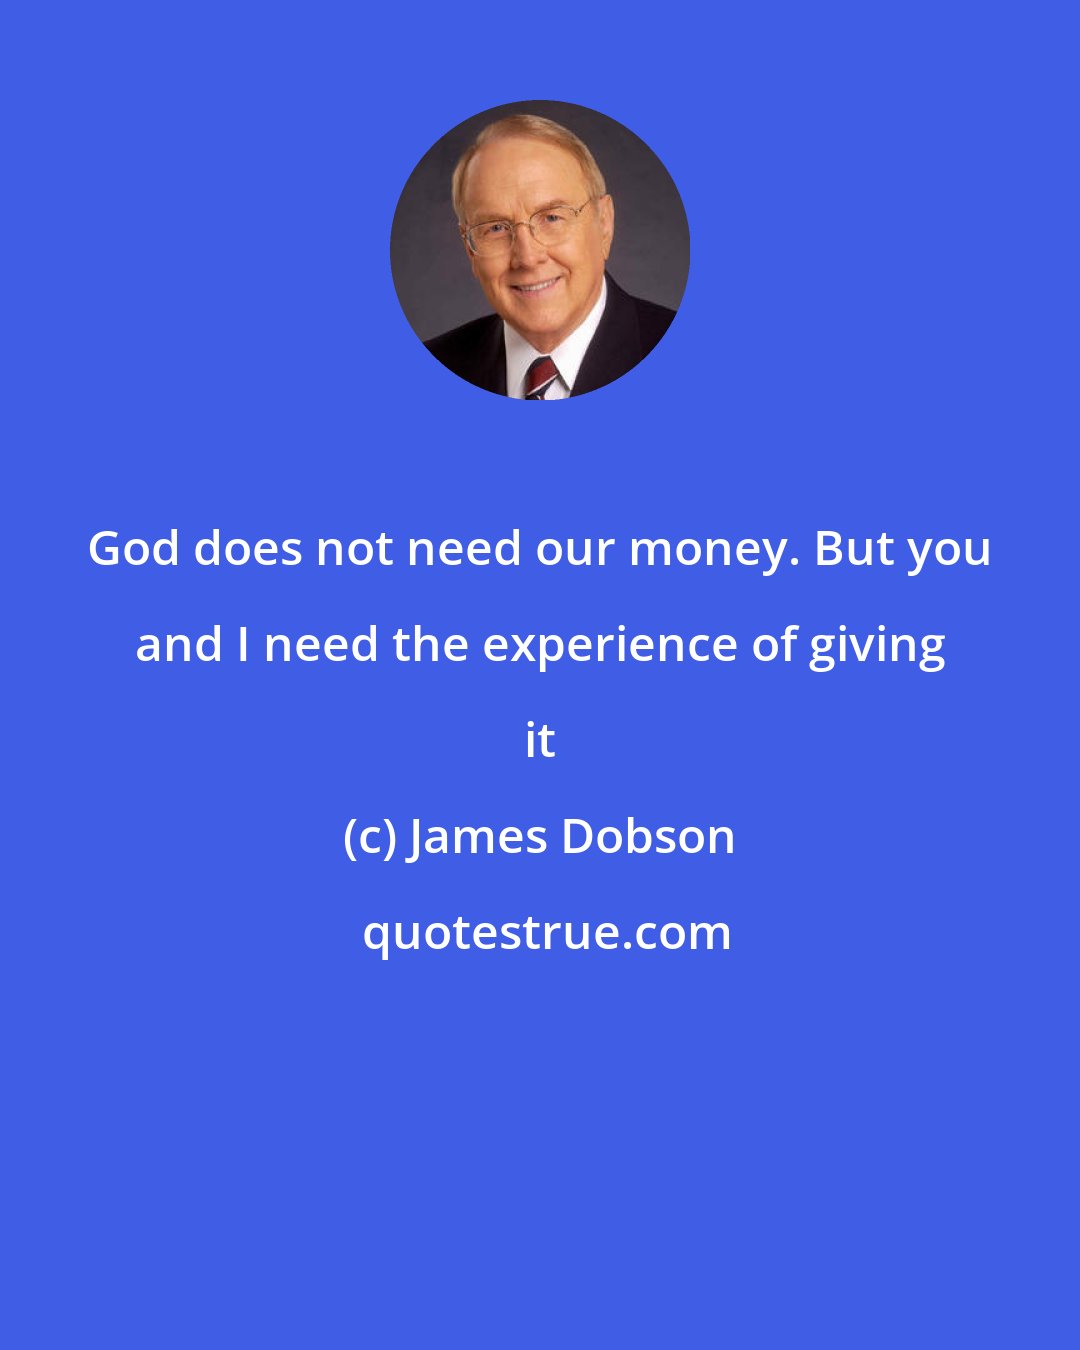 James Dobson: God does not need our money. But you and I need the experience of giving it